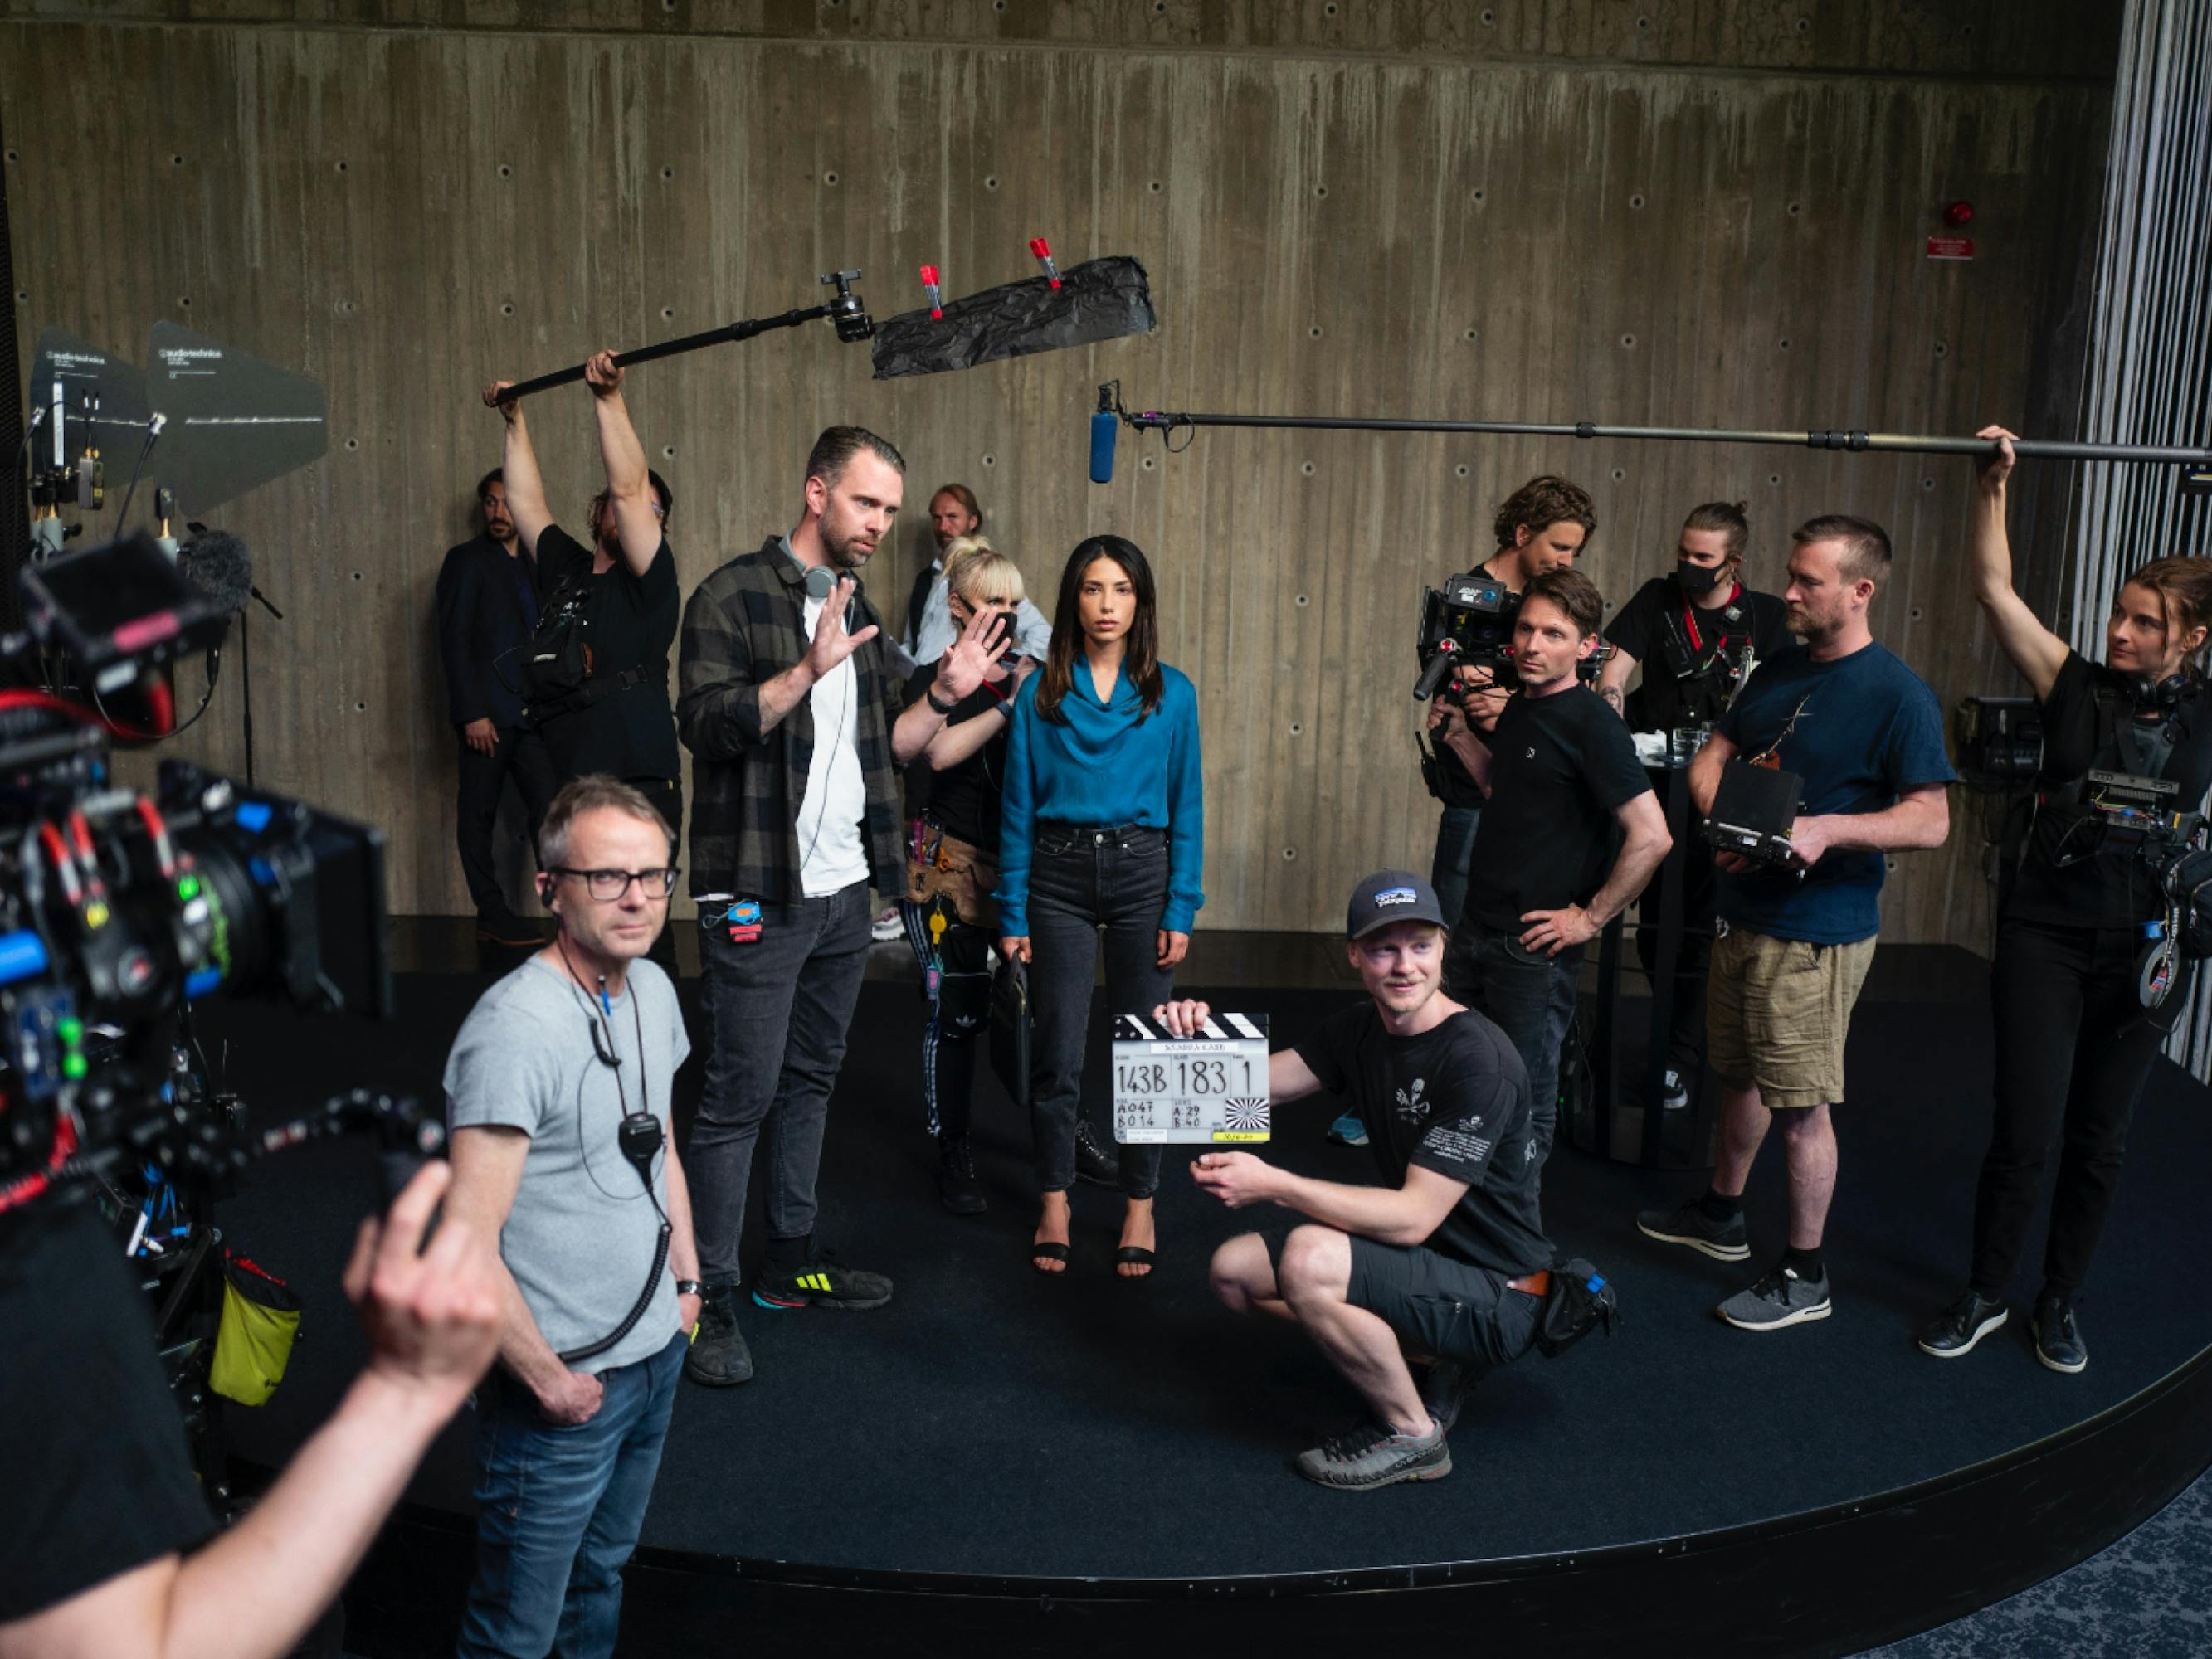 The cast and crew on the set of Snabba Cash. Evin Ahmad stands at the center in a teal shirt. There are cameras all around her.